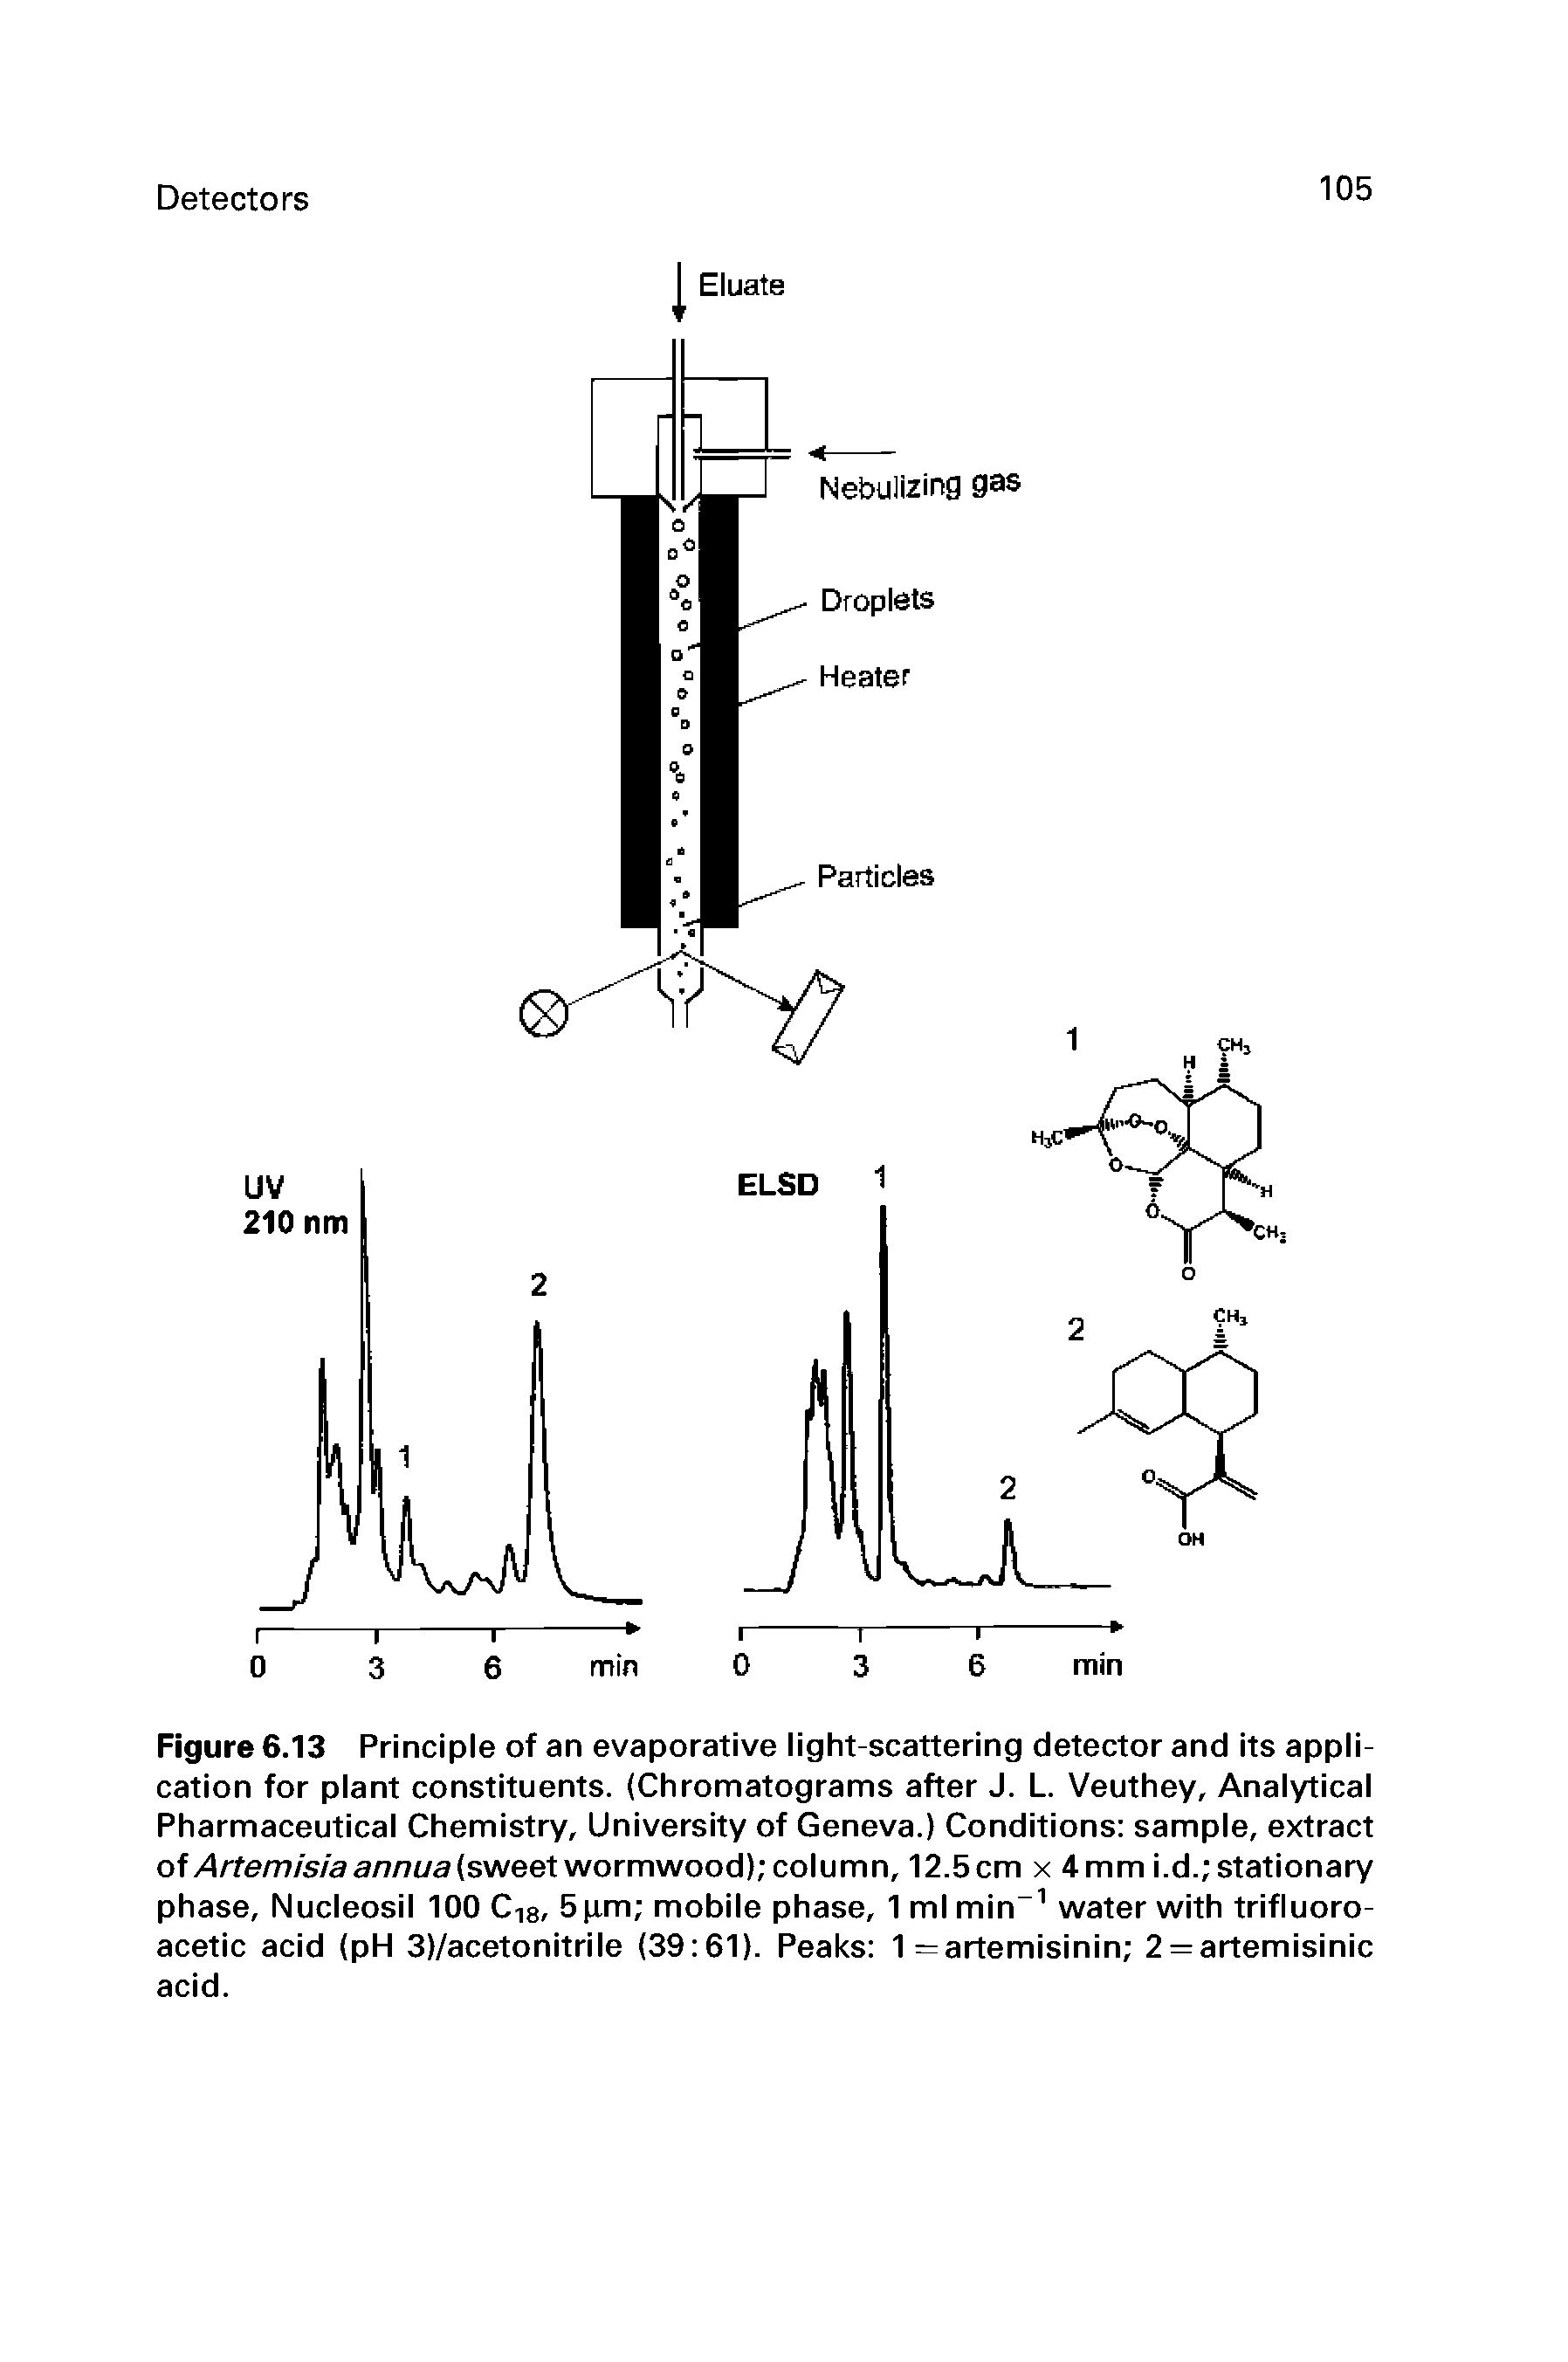 Figure 6.13 Principle of an evaporative light-scattering detector and its application for plant constituents. (Chromatograms after J. L Veuthey, Analytical Pharmaceutical Chemistry, University of Geneva.) Conditions sample, extract of Artemisia annua (sweet wormwood) column, 12.5cm x 4mm i.d. stationary phase, Nucleosil 100 Cqg/ 5pm mobile phase, 1 ml min water with trifluoroacetic acid (pH 3)/acetonitrile (39 61). Peaks 1 = artemisinin 2 = artemisinic acid.